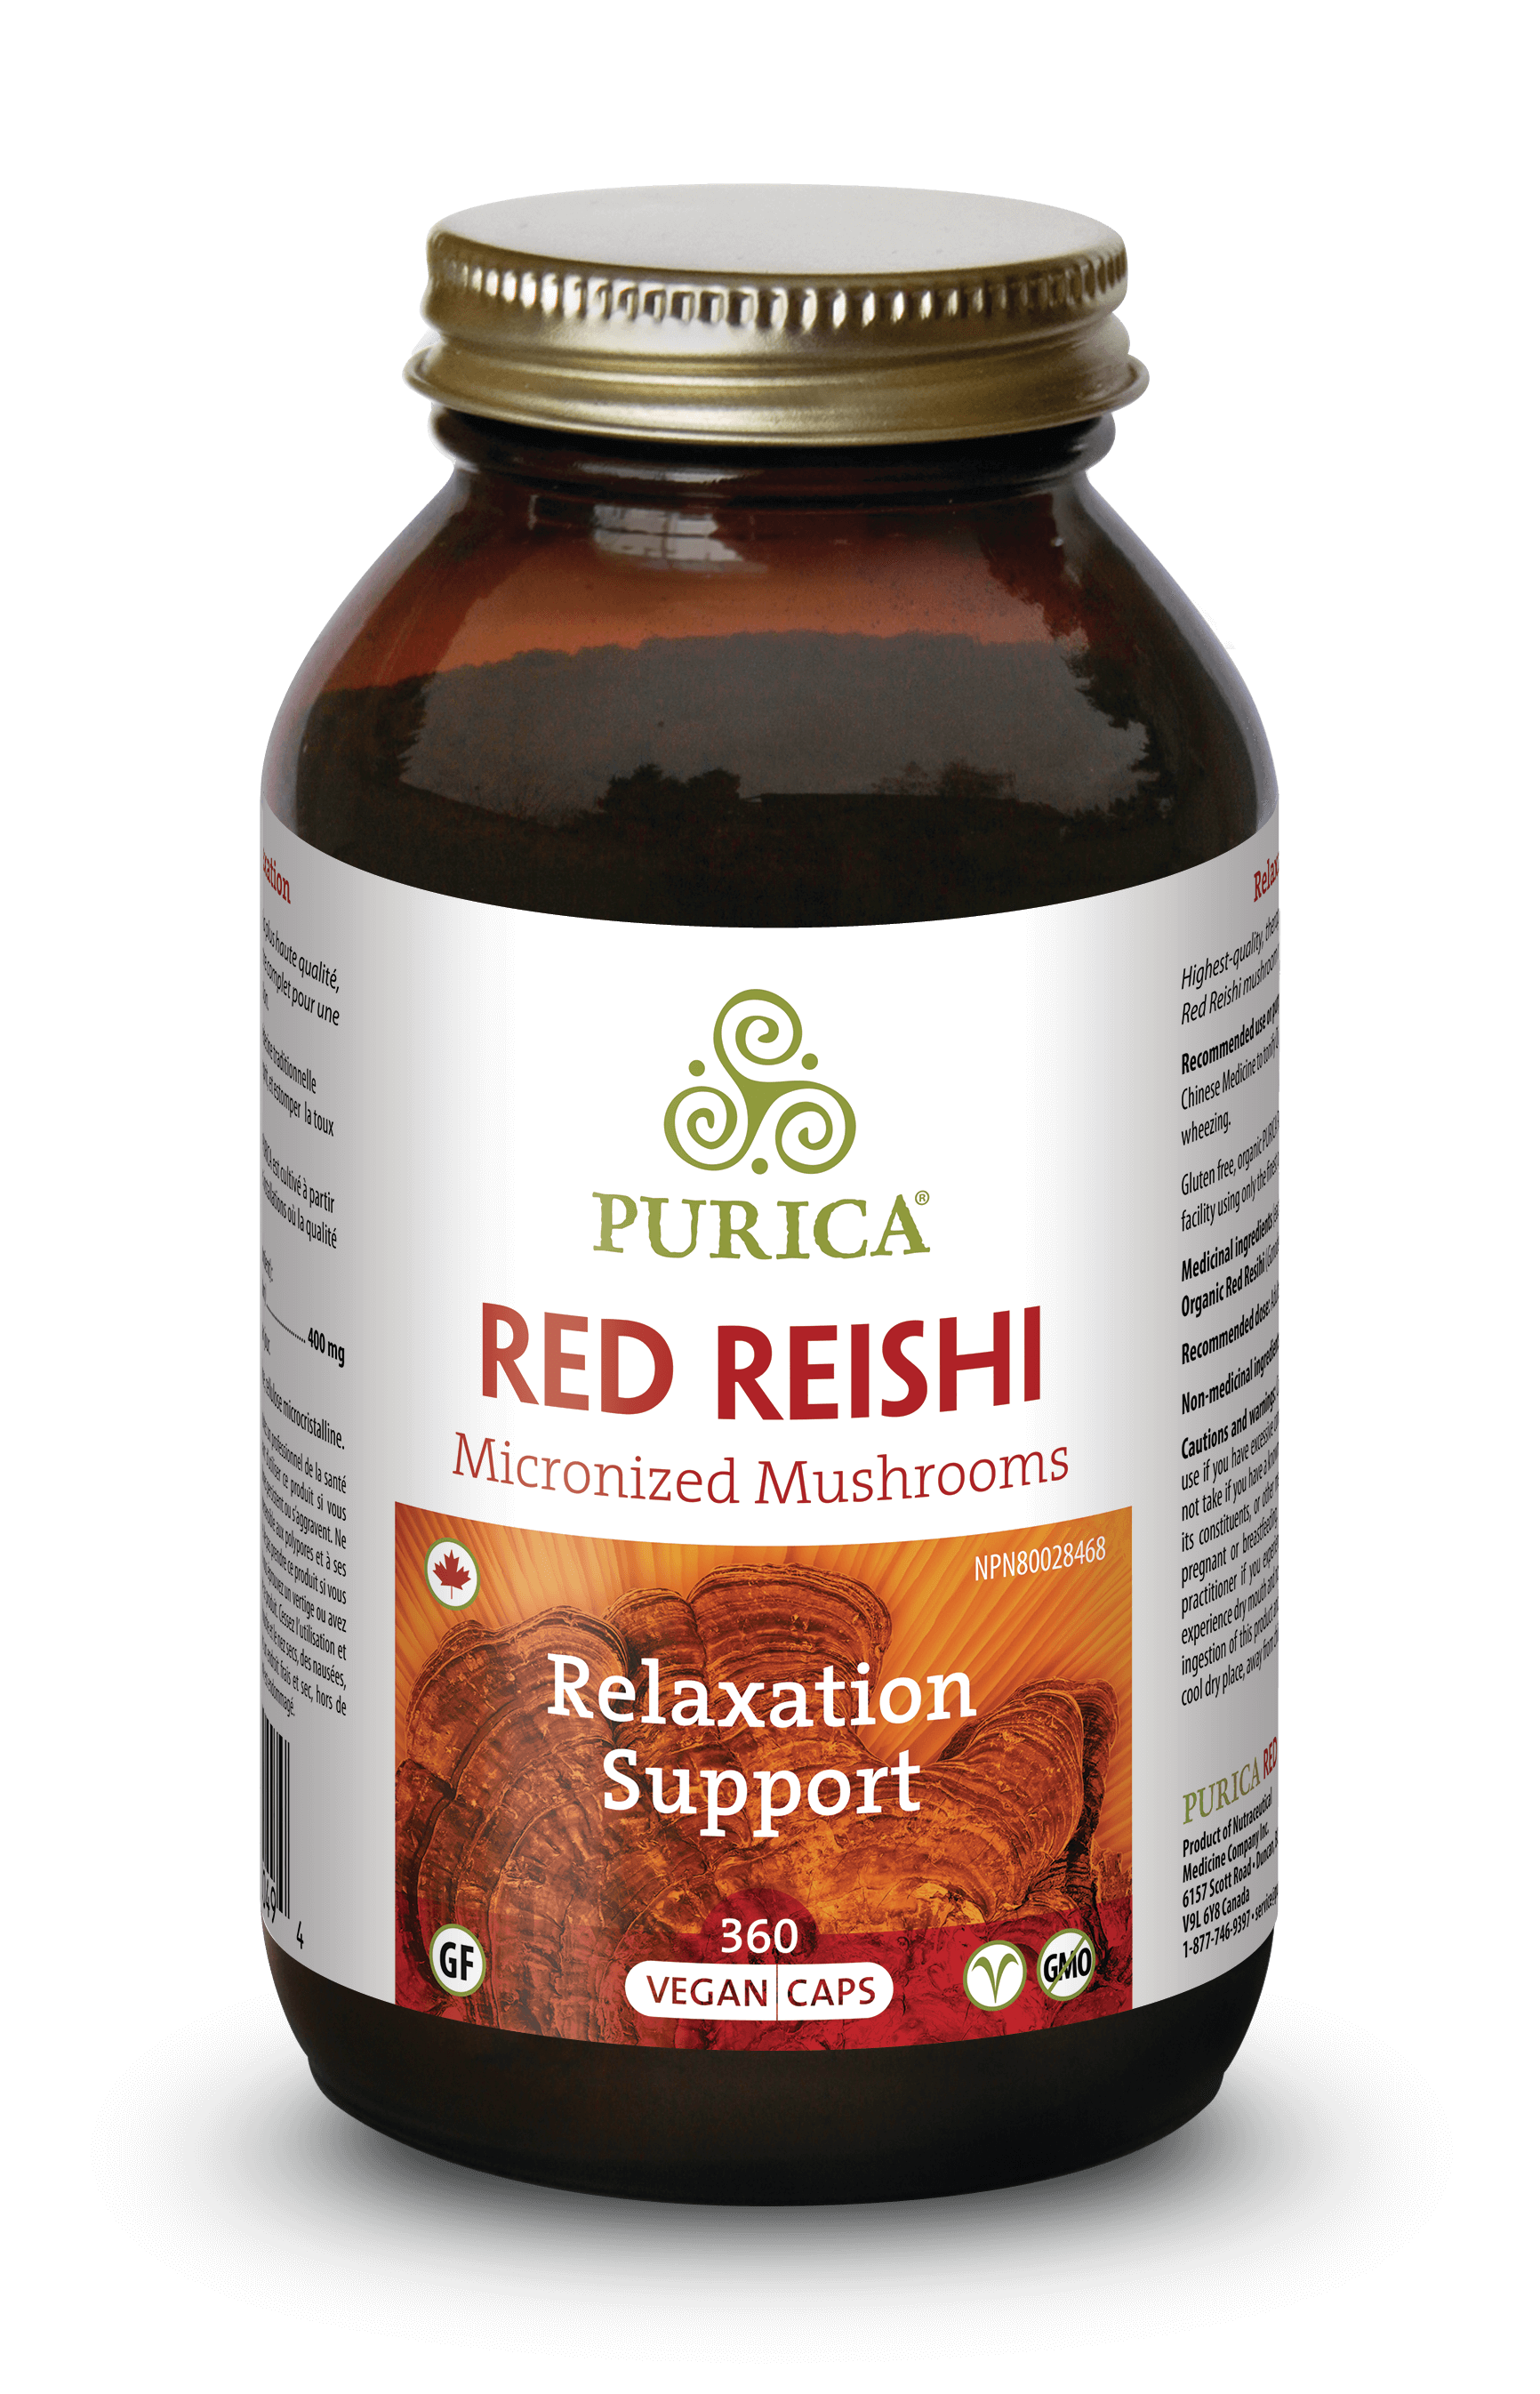 Purica Red Reishi (360 VCaps) - Lifestyle Markets